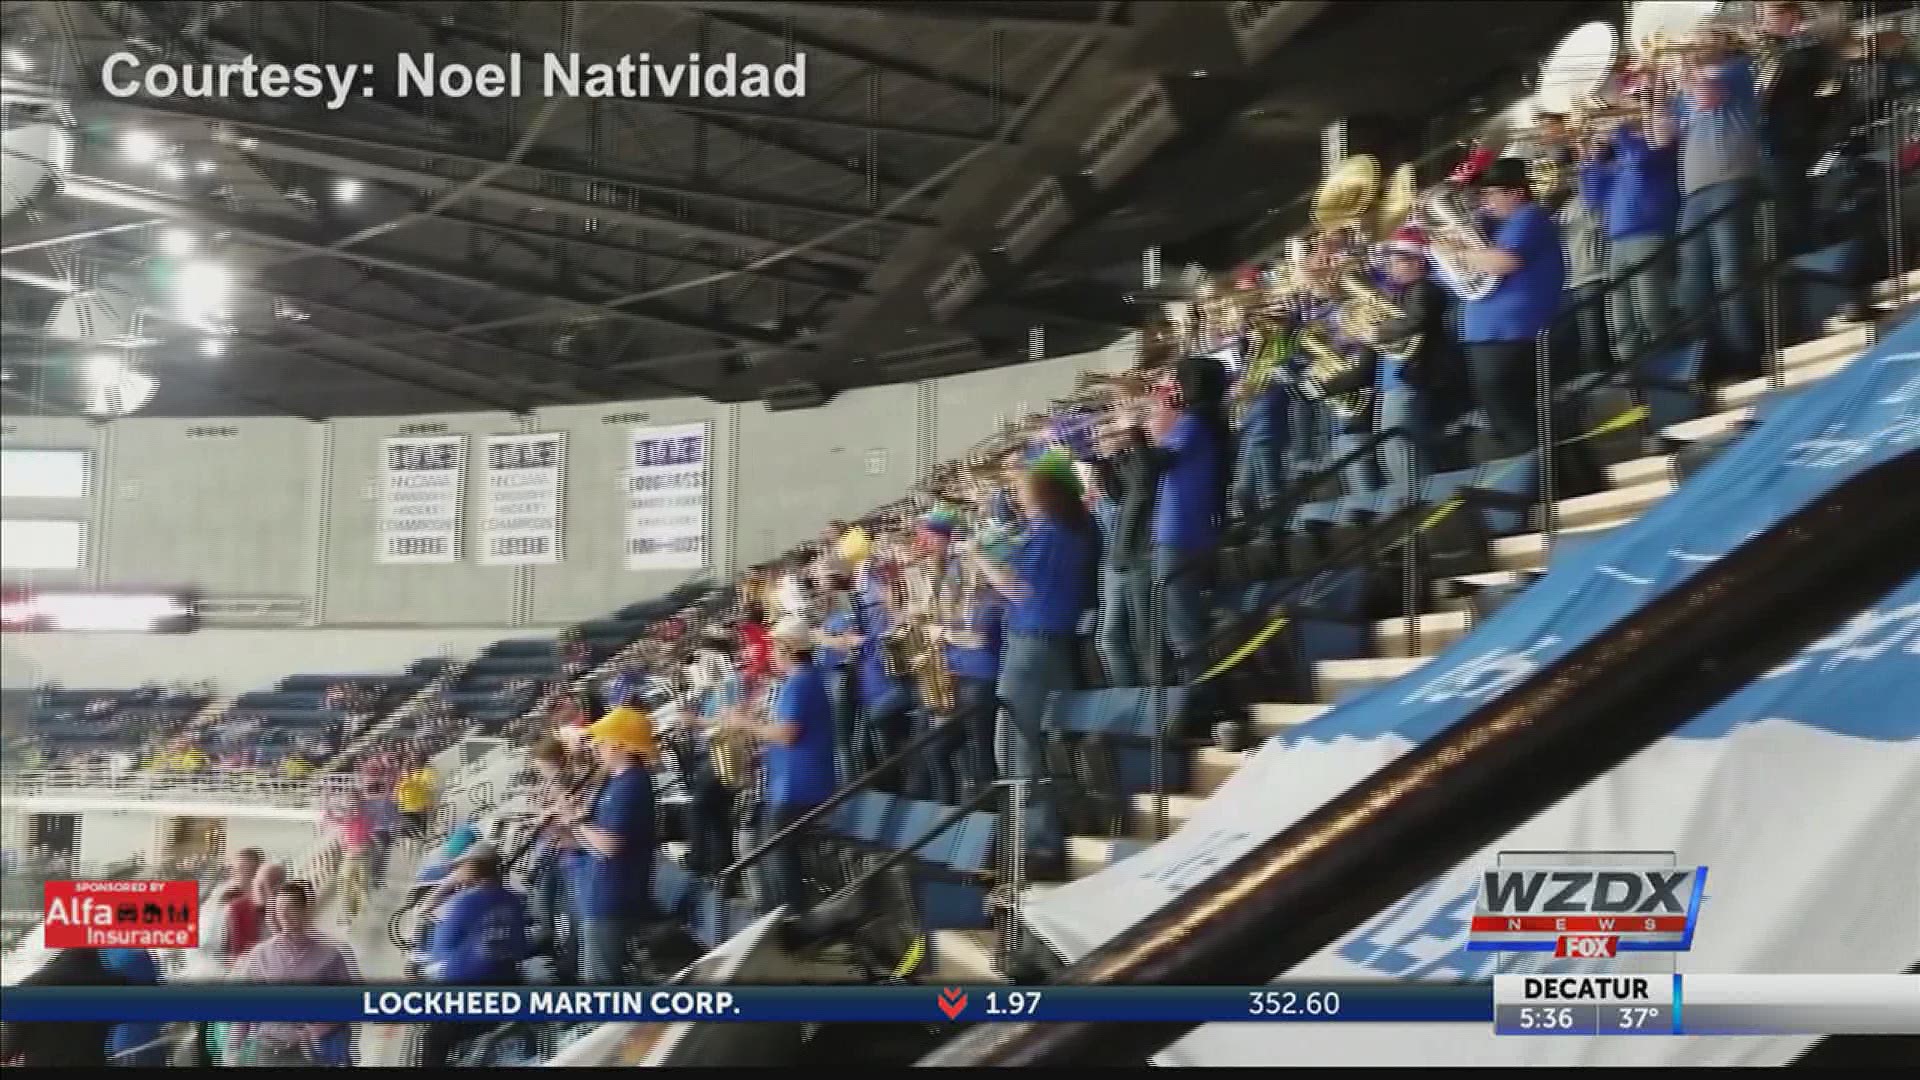 The UAH pep band will not be playing at hockey games this season despite hundreds signing a petition to allow them to play.